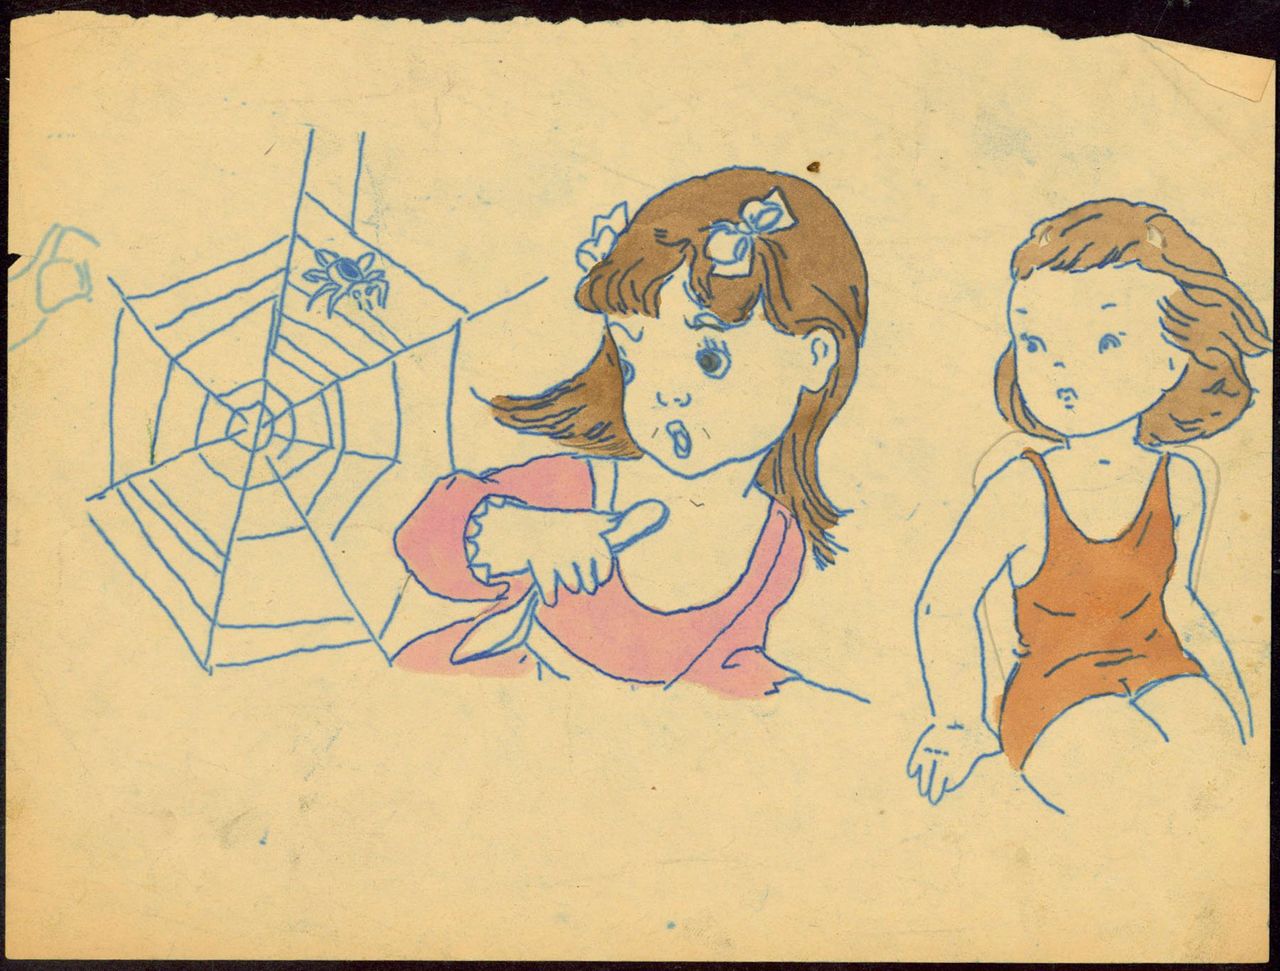 Untitled coloring book clipping ("Little girls looking over their shoulders"). 